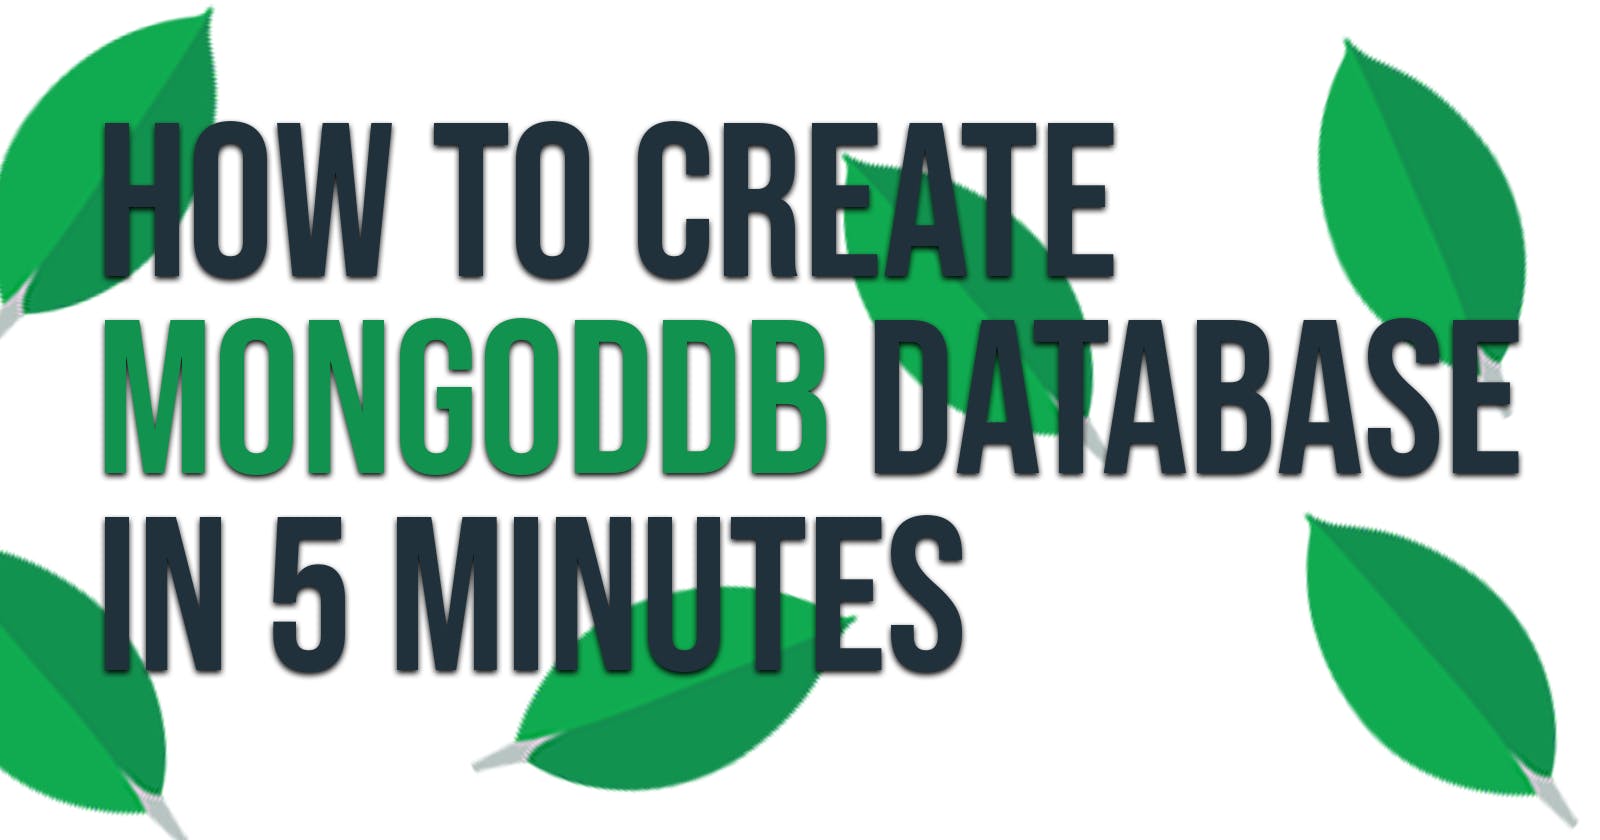 How to create a MongoDB database in 5 minutes